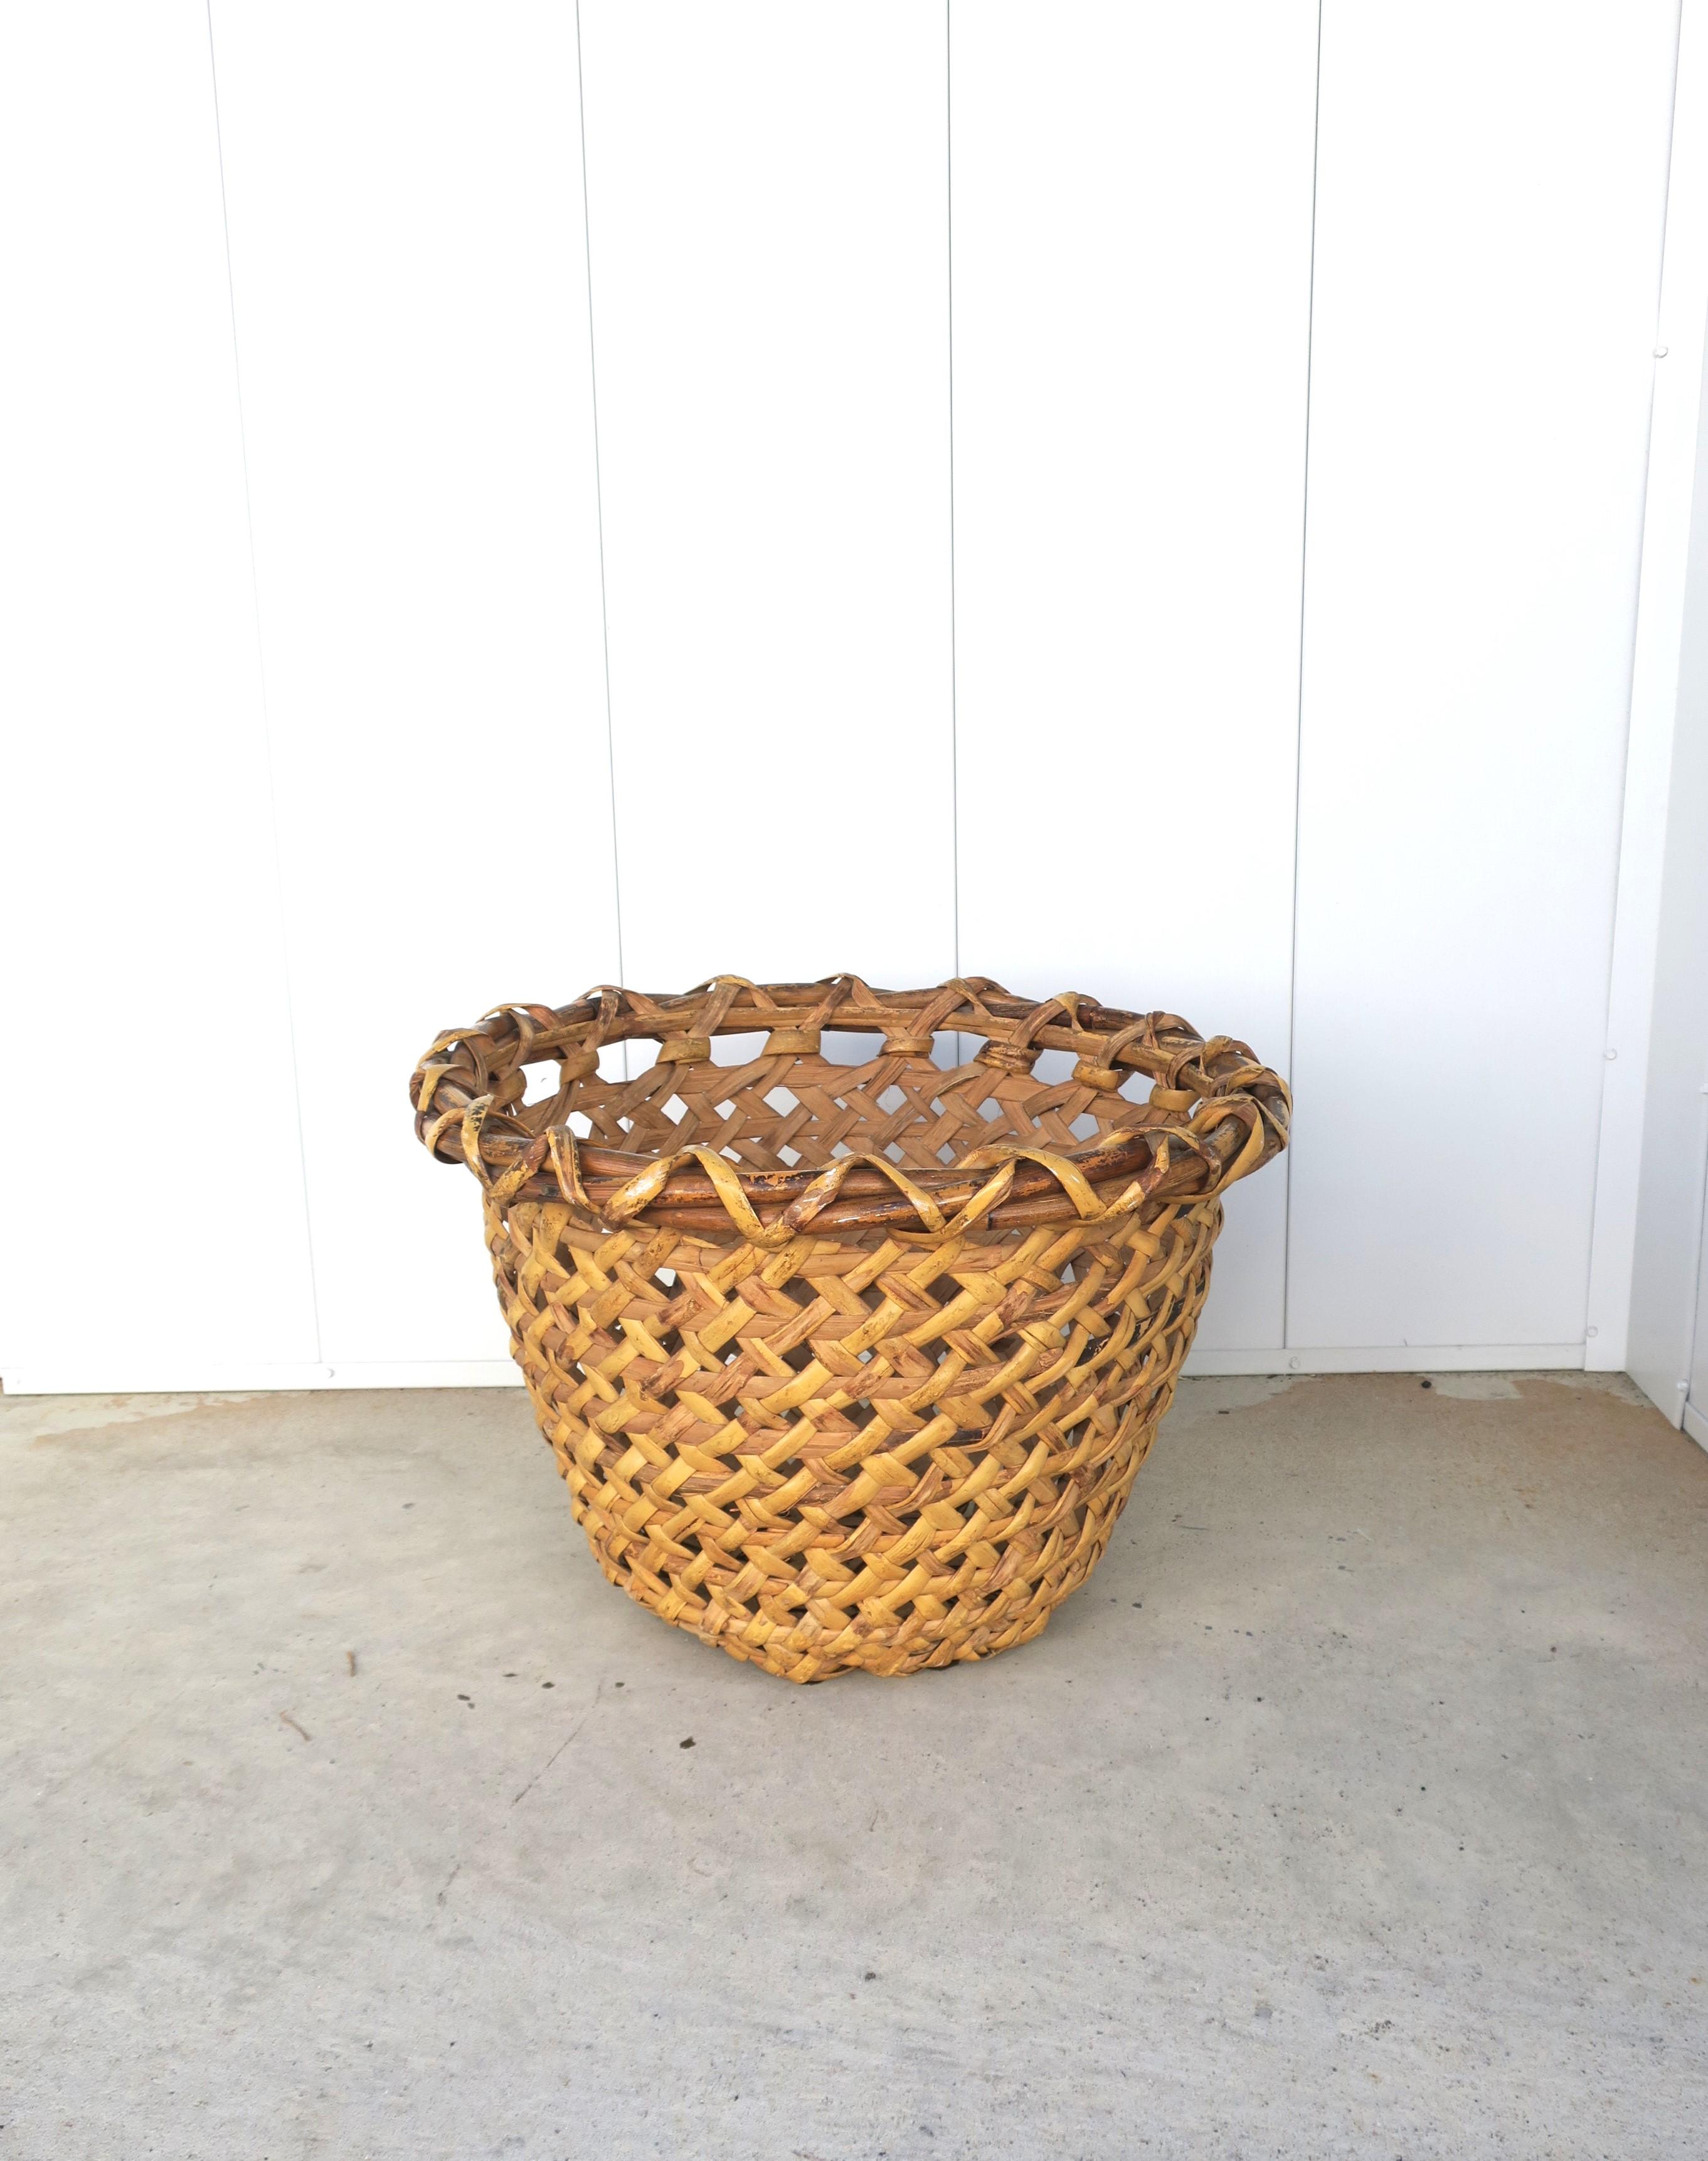 A sturdy hand-woven vintage wicker basket, circa 20th century.

Basket could be decorative, used as a planter cachepot (plant potholder), or as a laundry basket hamper/storage piece, hold clean rolled towels for a shower, bath, pool, etc., many